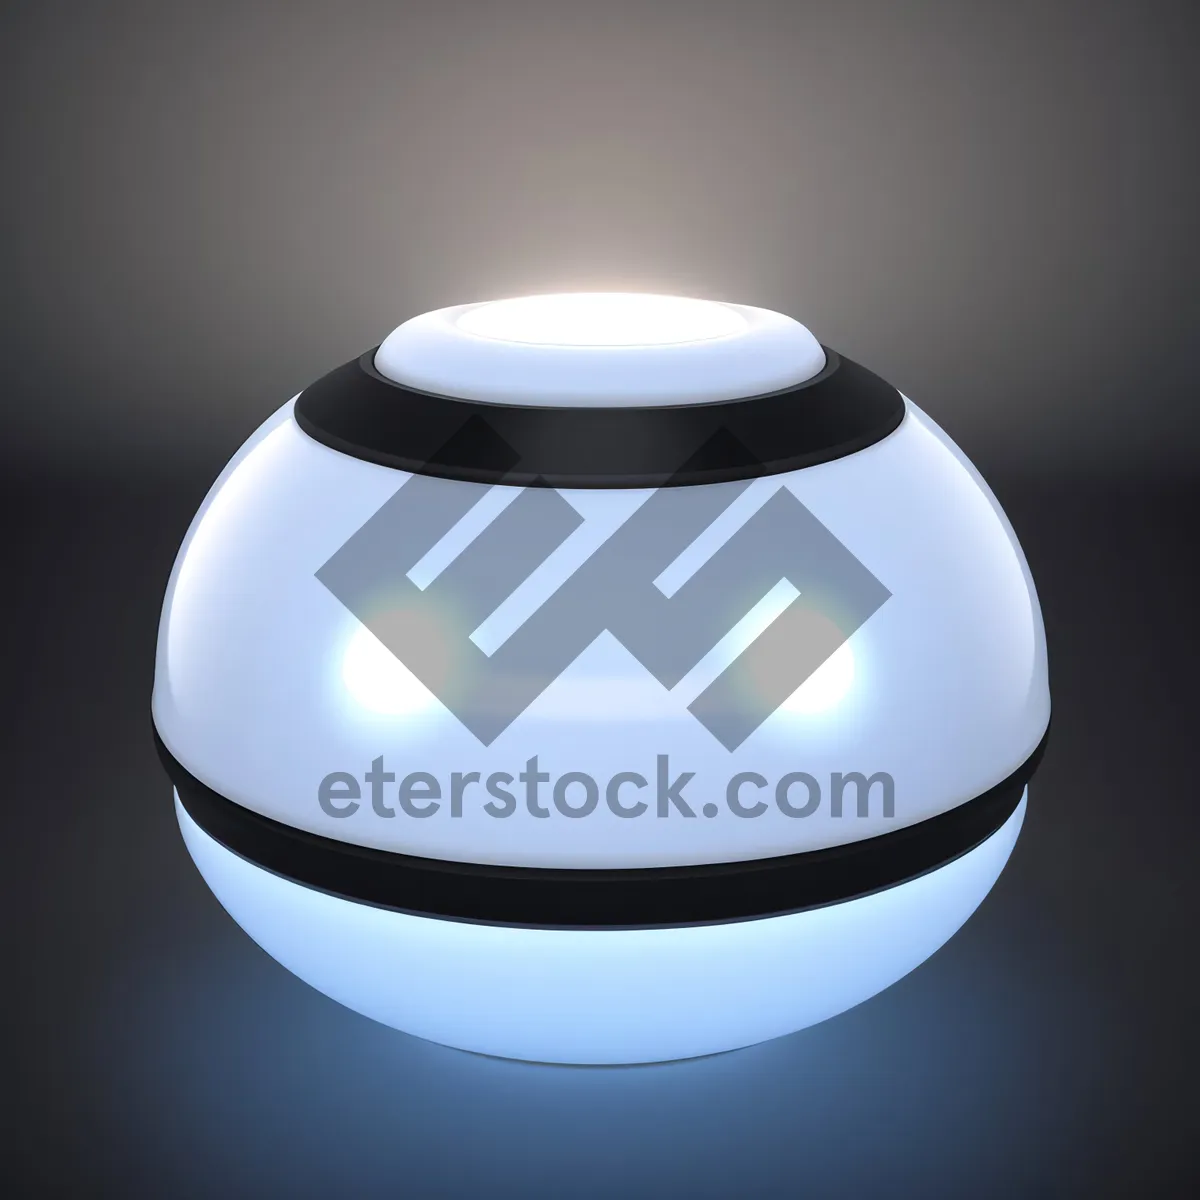 Picture of Bright Glass Ball Icon: Shiny Graphic Element